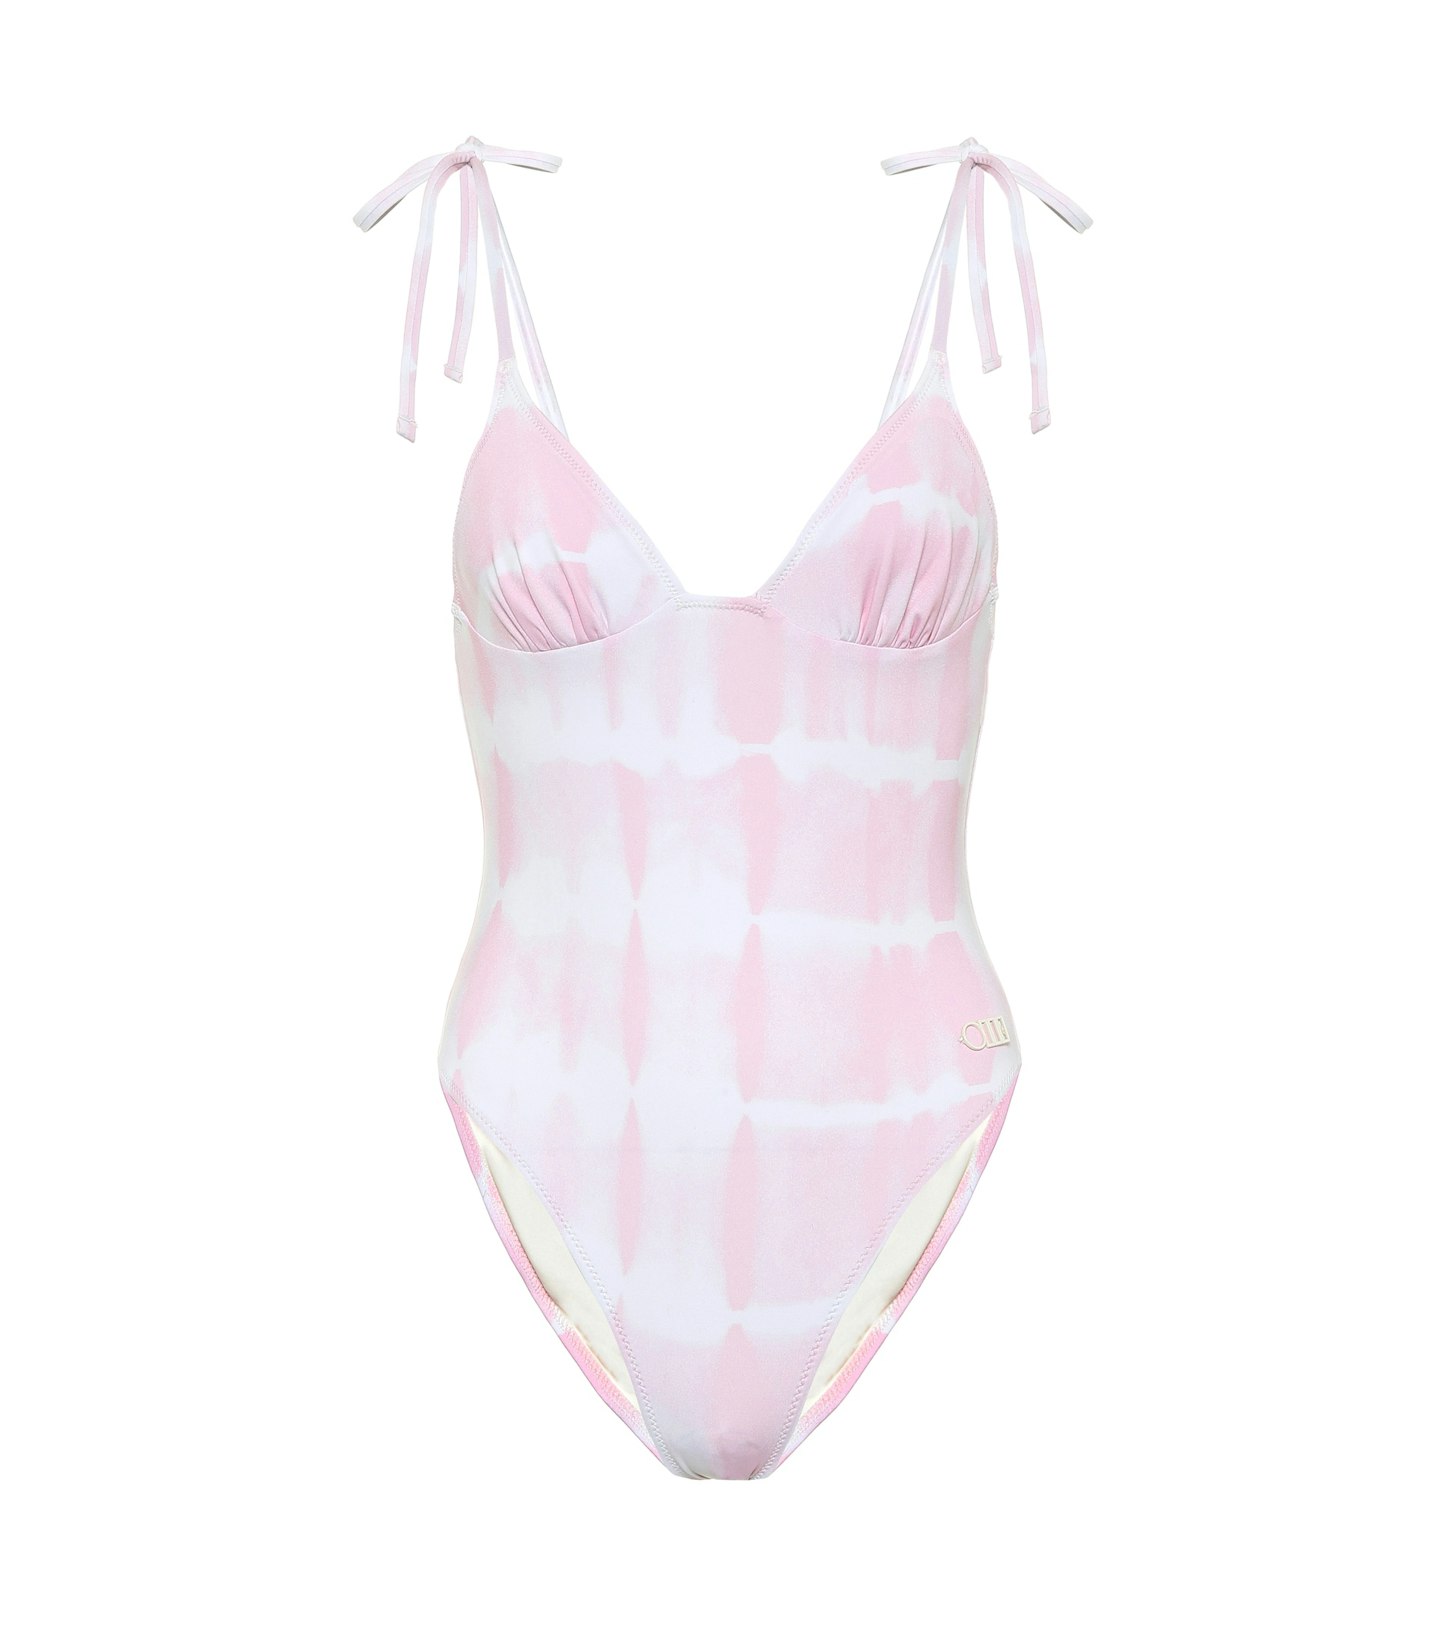 Solid & Striped, The Olympia Tie-Dye Swimsuit, Was £162, Now £64